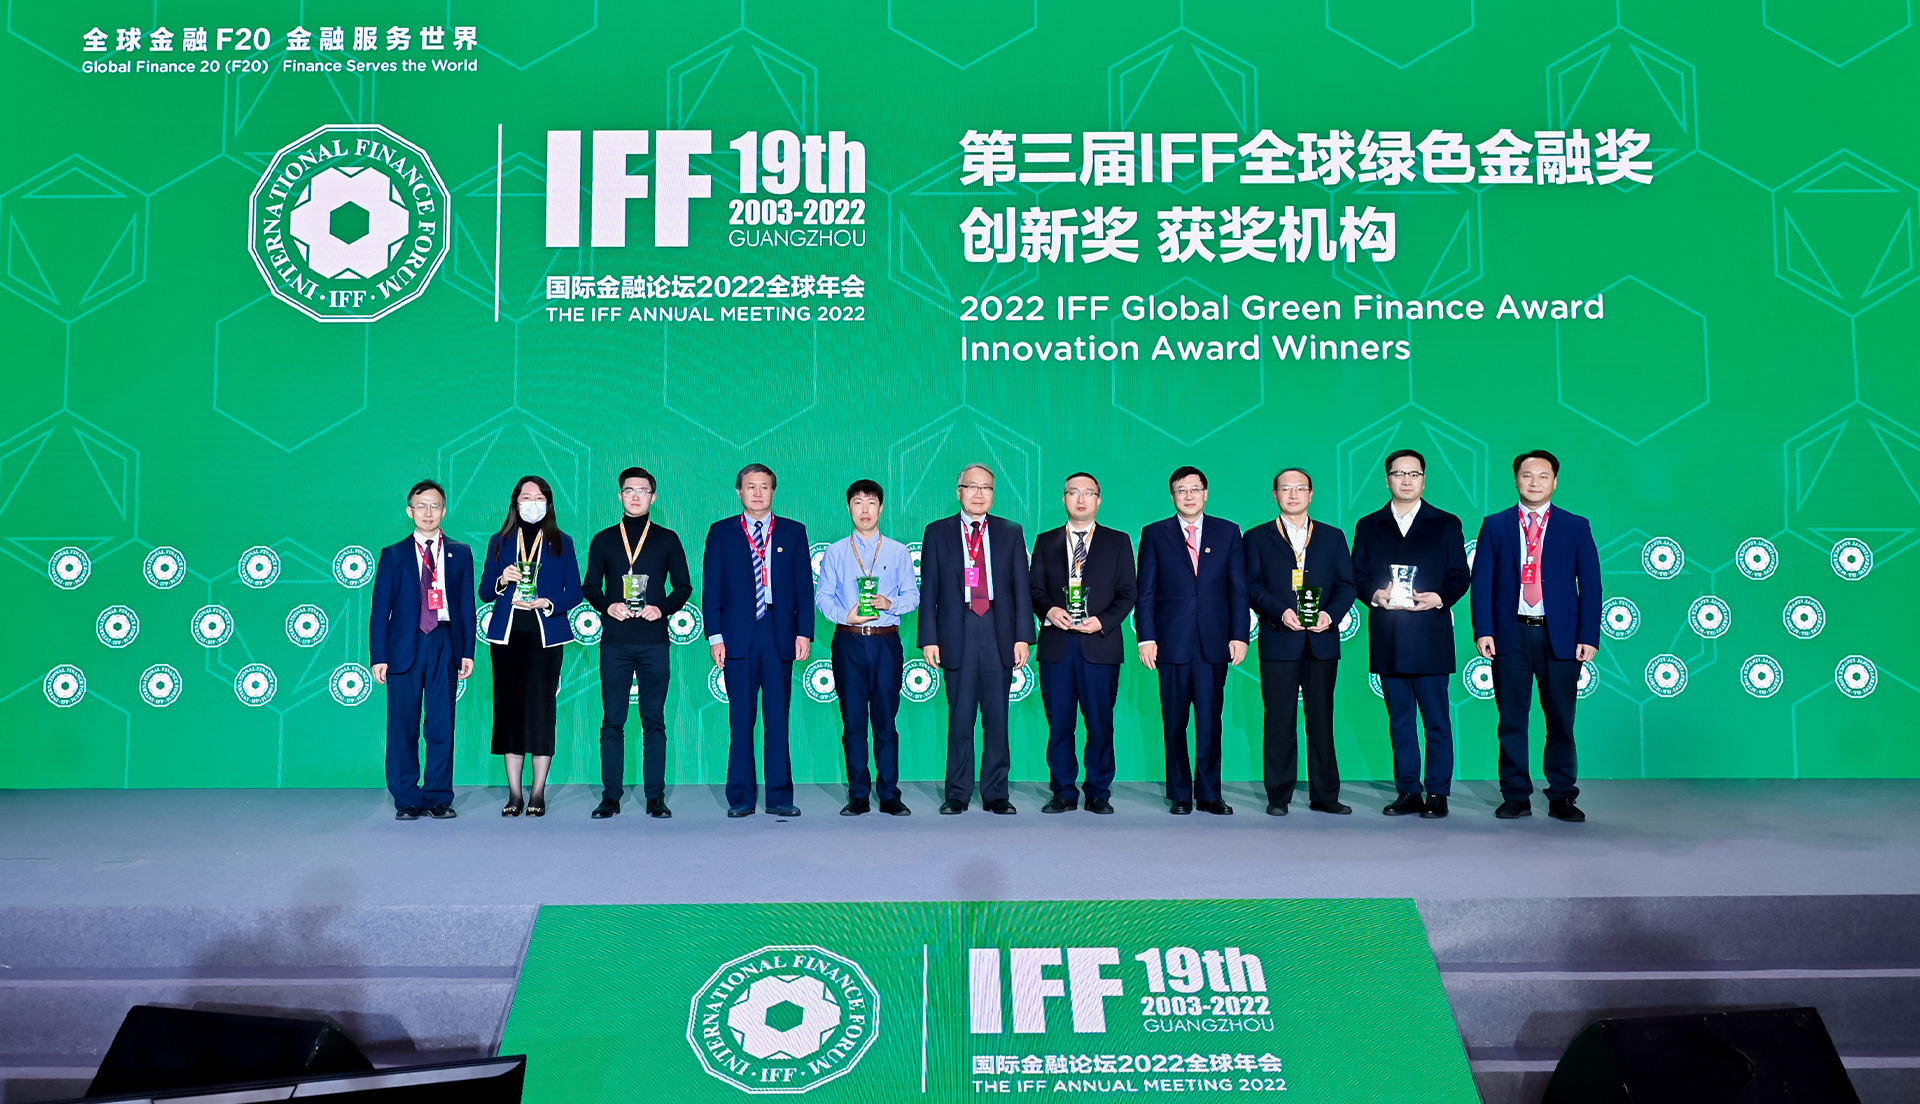 IFF 2022 Annual meeting Banquet and Ceremony for 2022 IFF Global Green Finance Award Innovation Award Winners